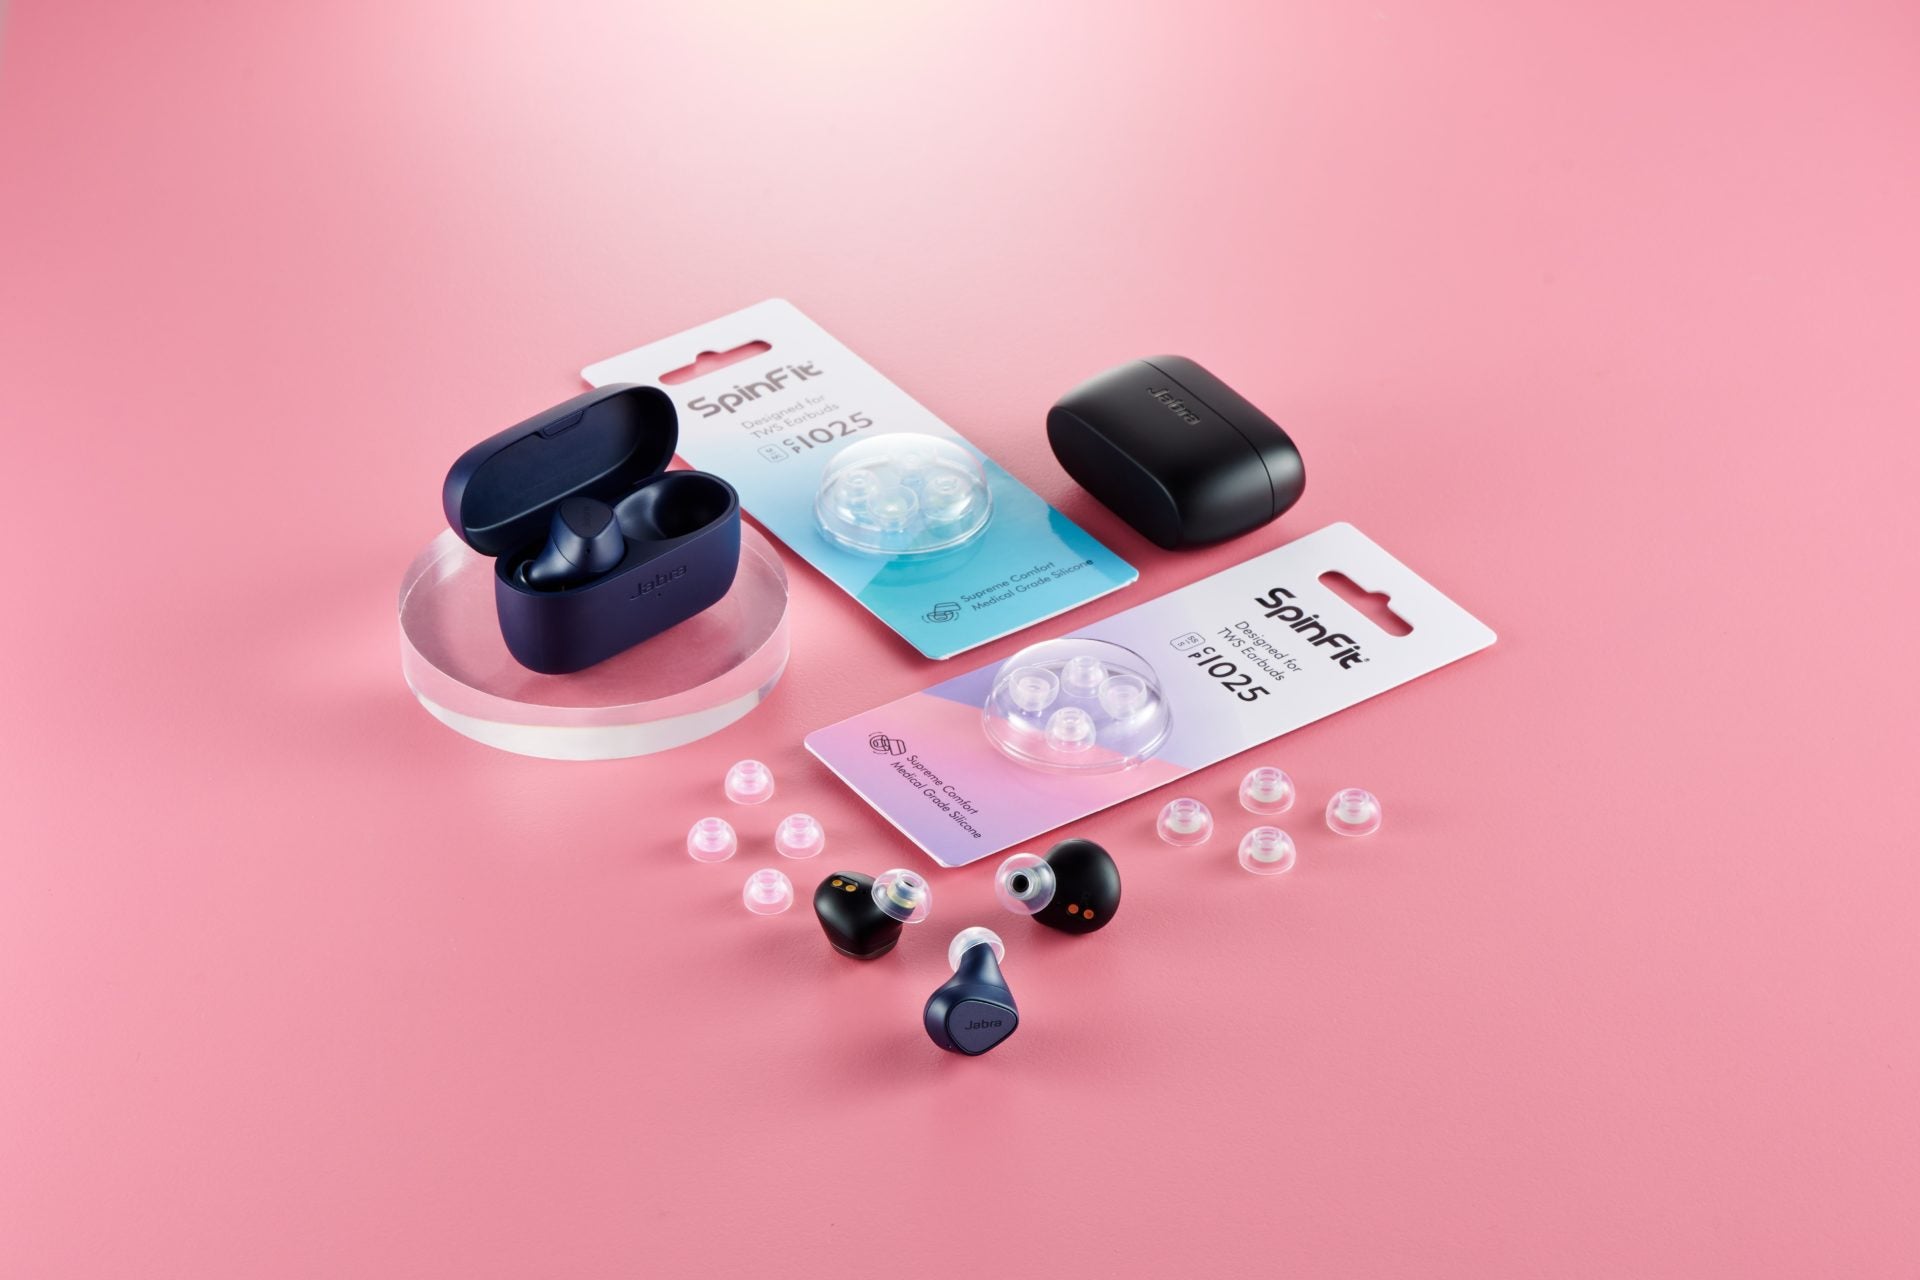 SpinFit CP1025 (eartips only, no adapter) Eartips for TWS Earphones with Medical Grade Silicone